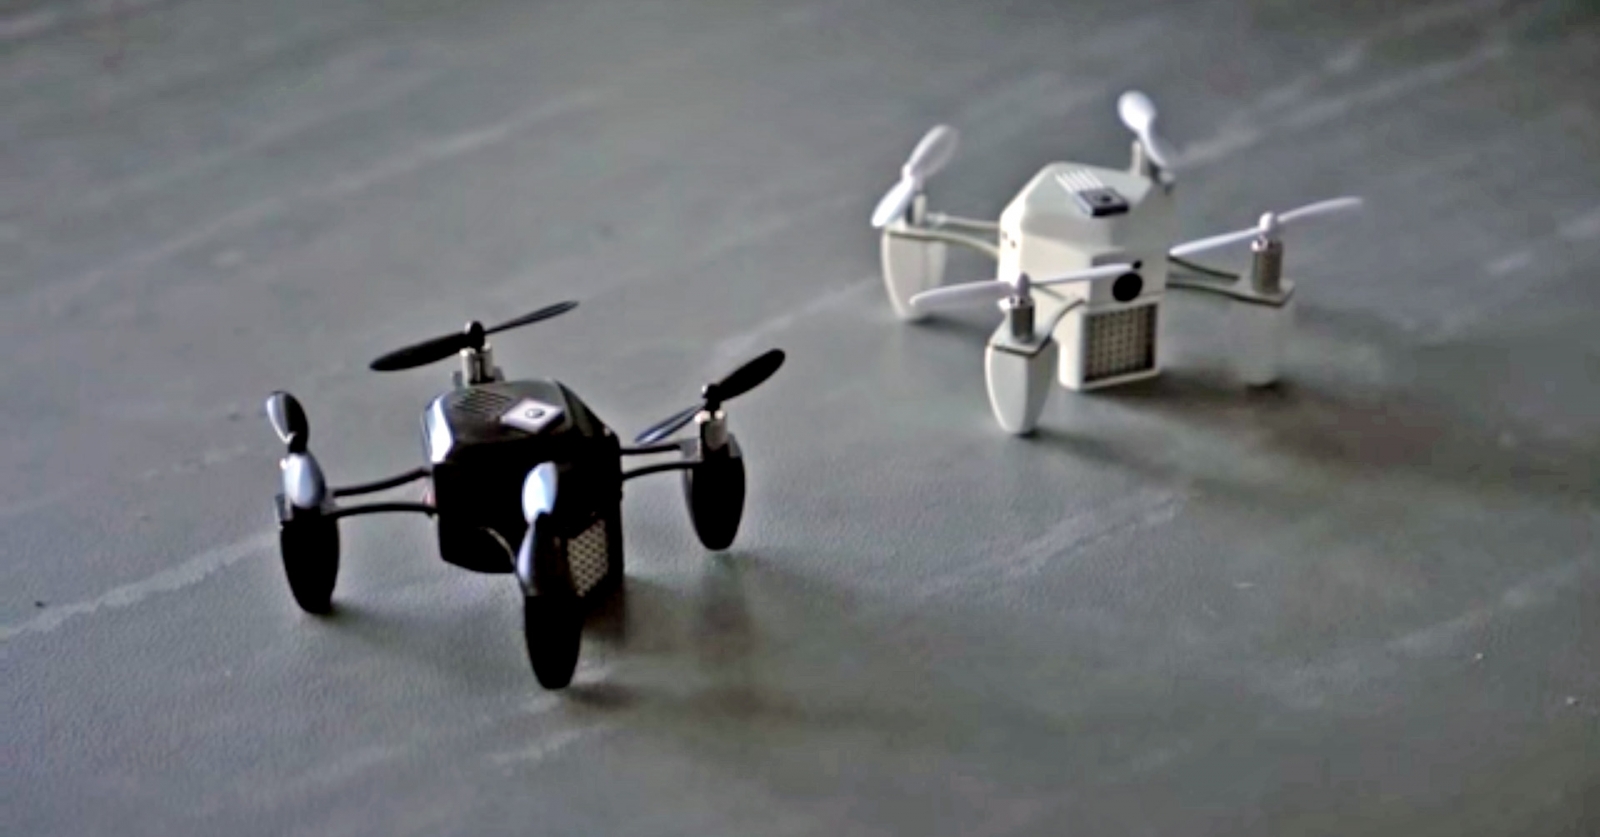 Zano: A Tiny Clever Smartphone-Controlled Helicopter Drone That Takes